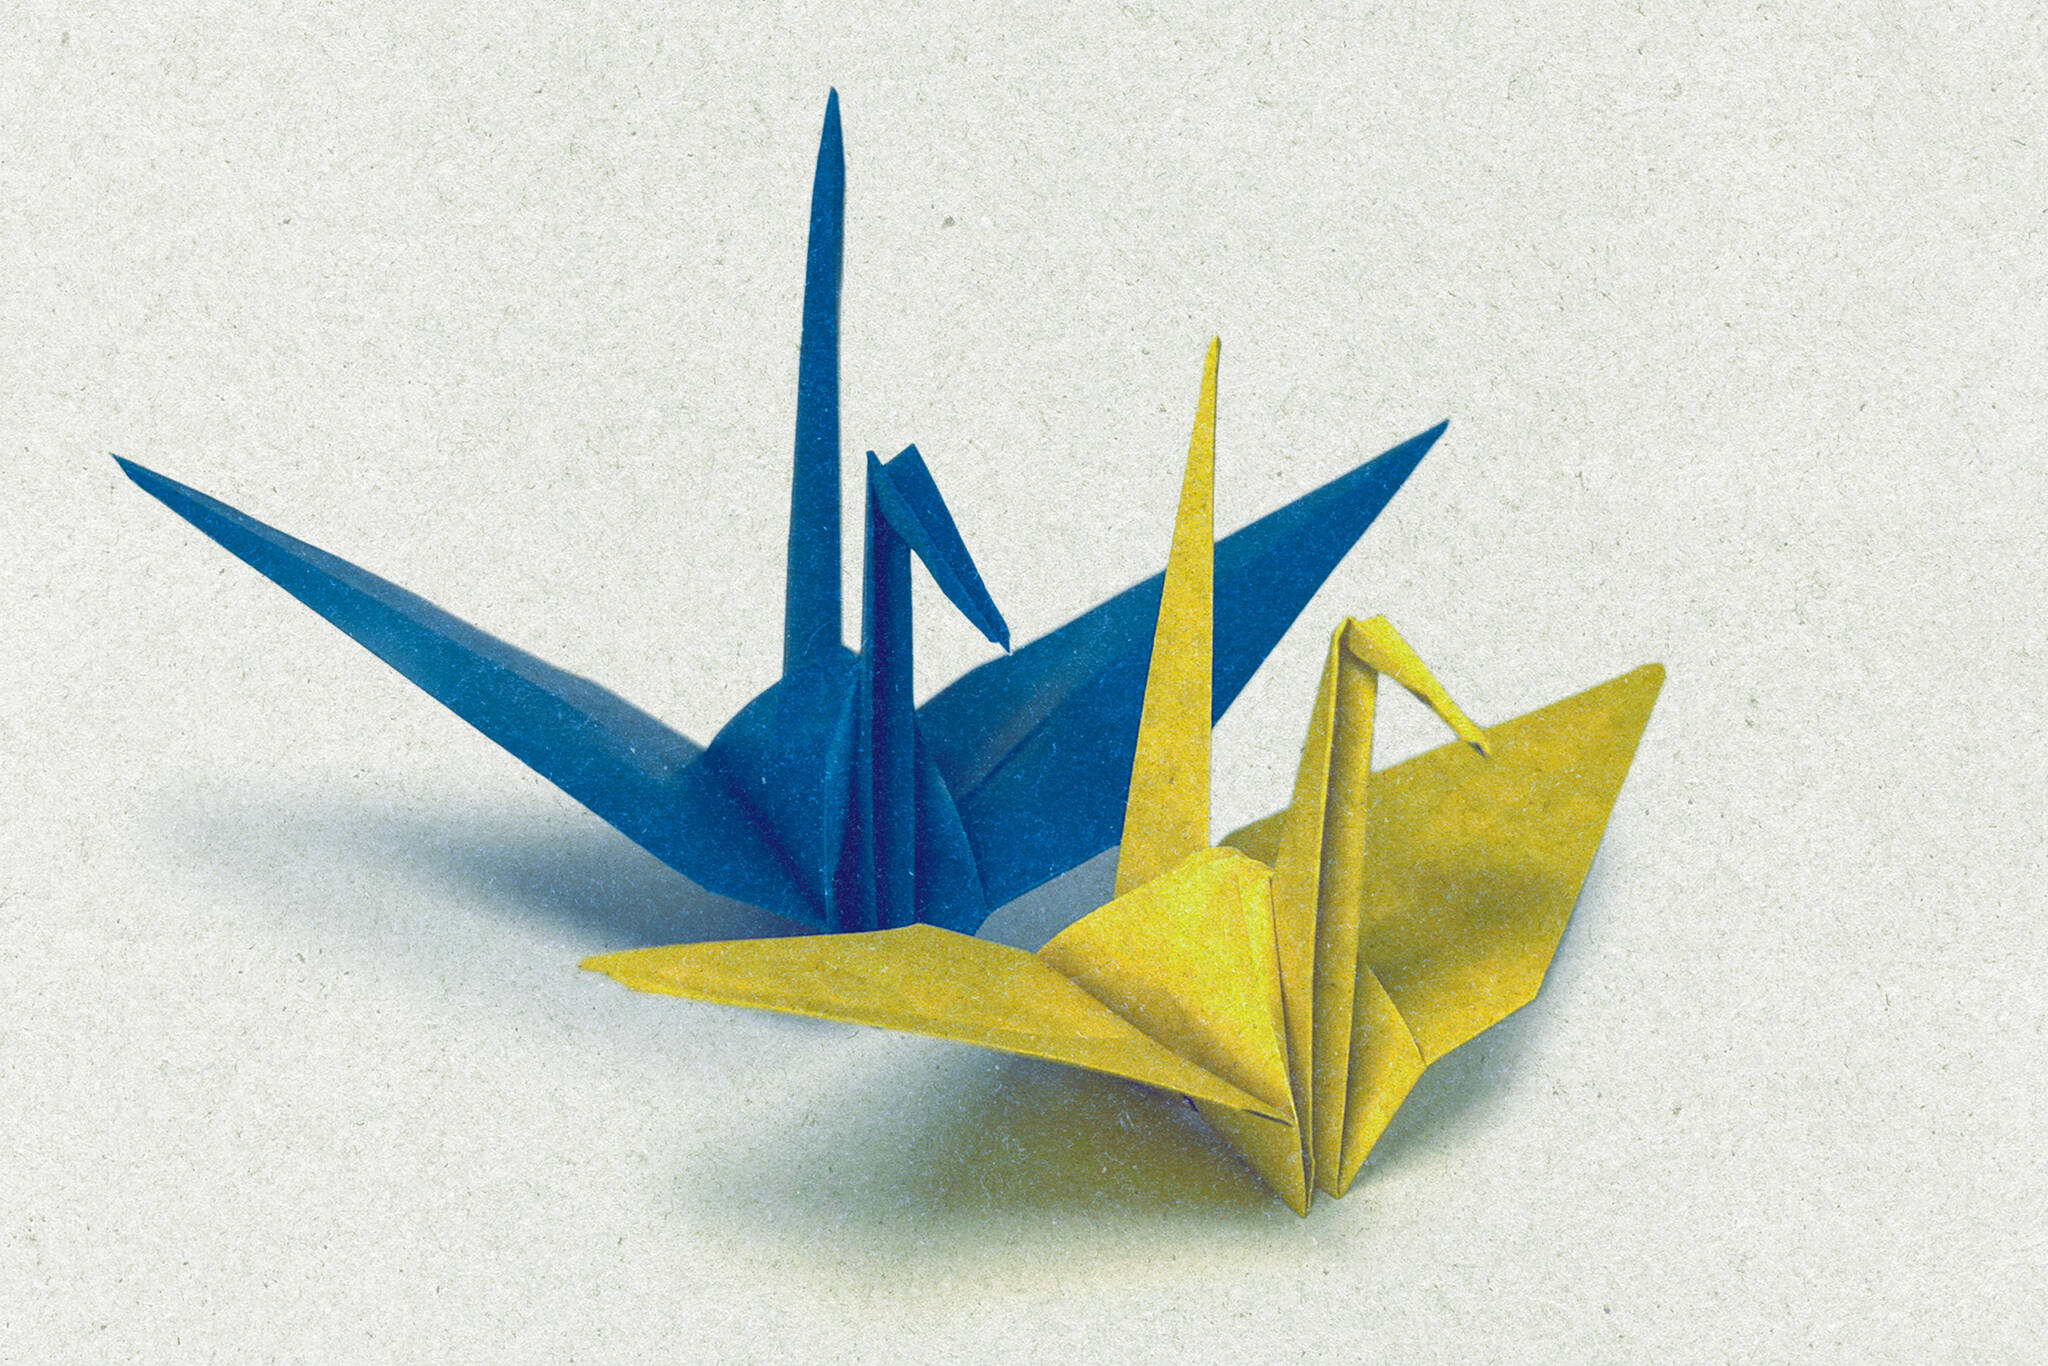 Origami cranes are folded to symbolize peace in Ukraine. (Photo provided by the Kenai Art Center)